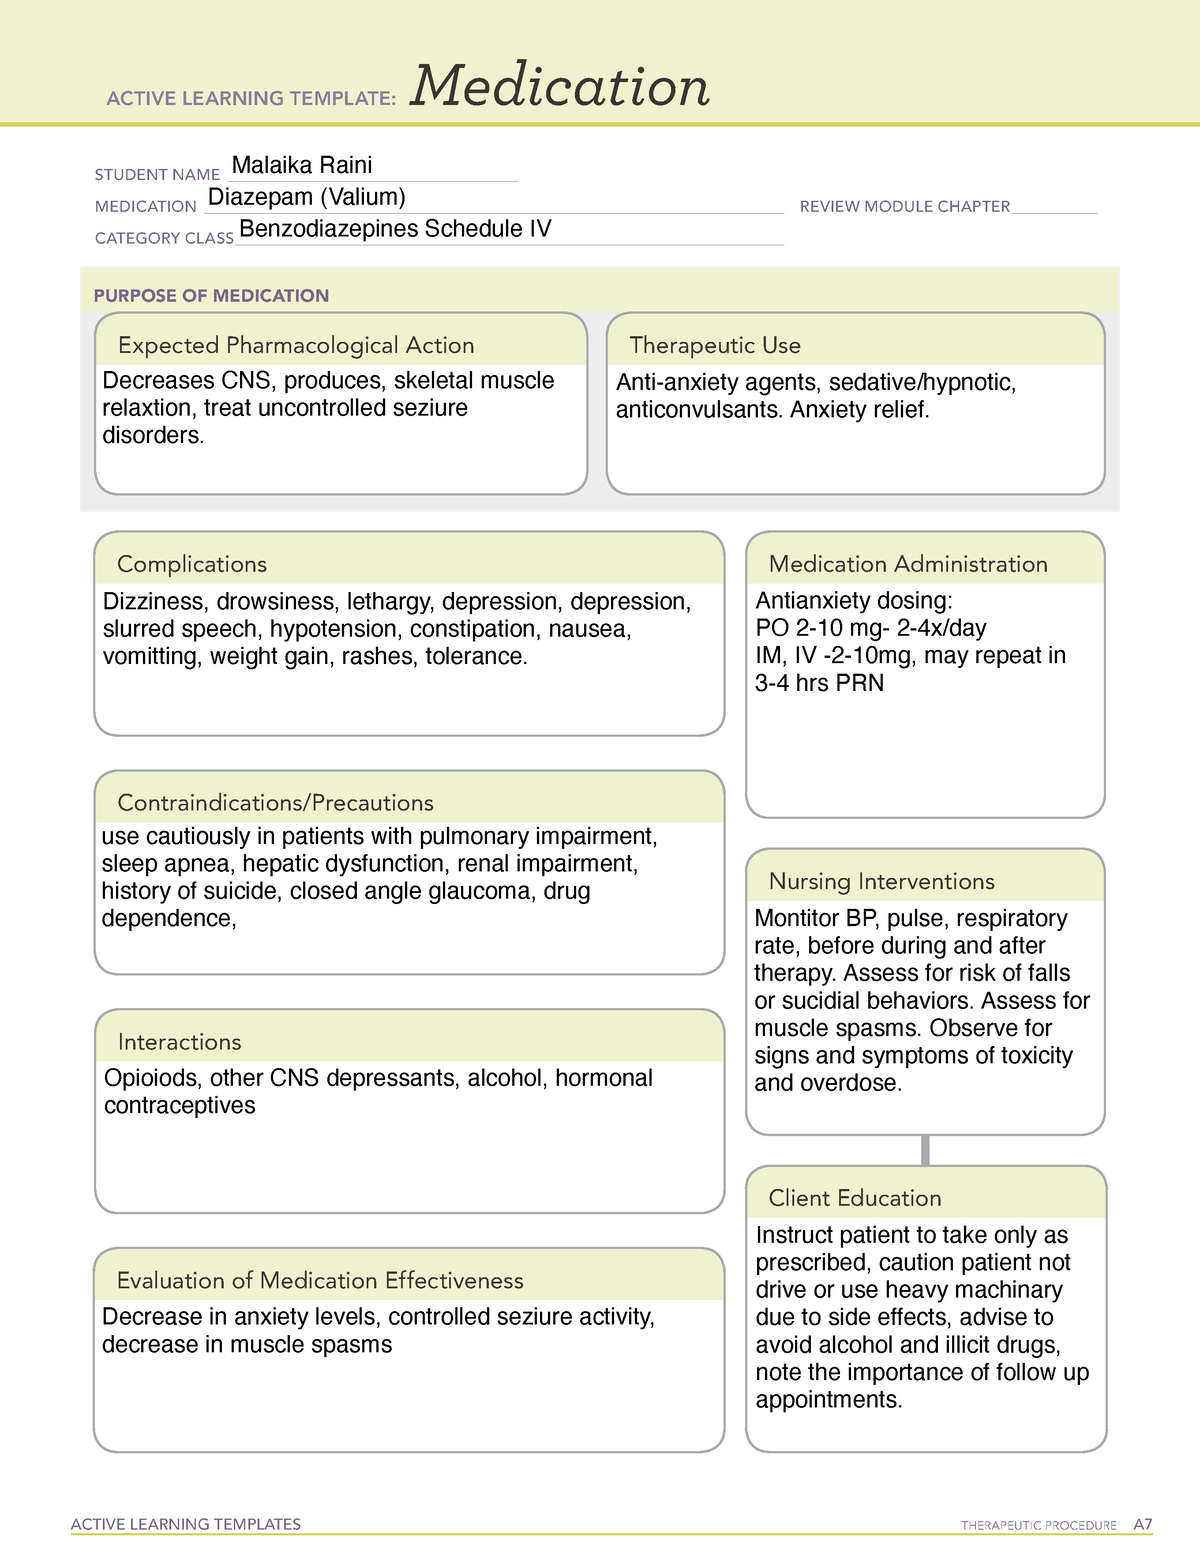 active-learning-template-medication-4-active-learning-templates-therapeutic-procedure-a